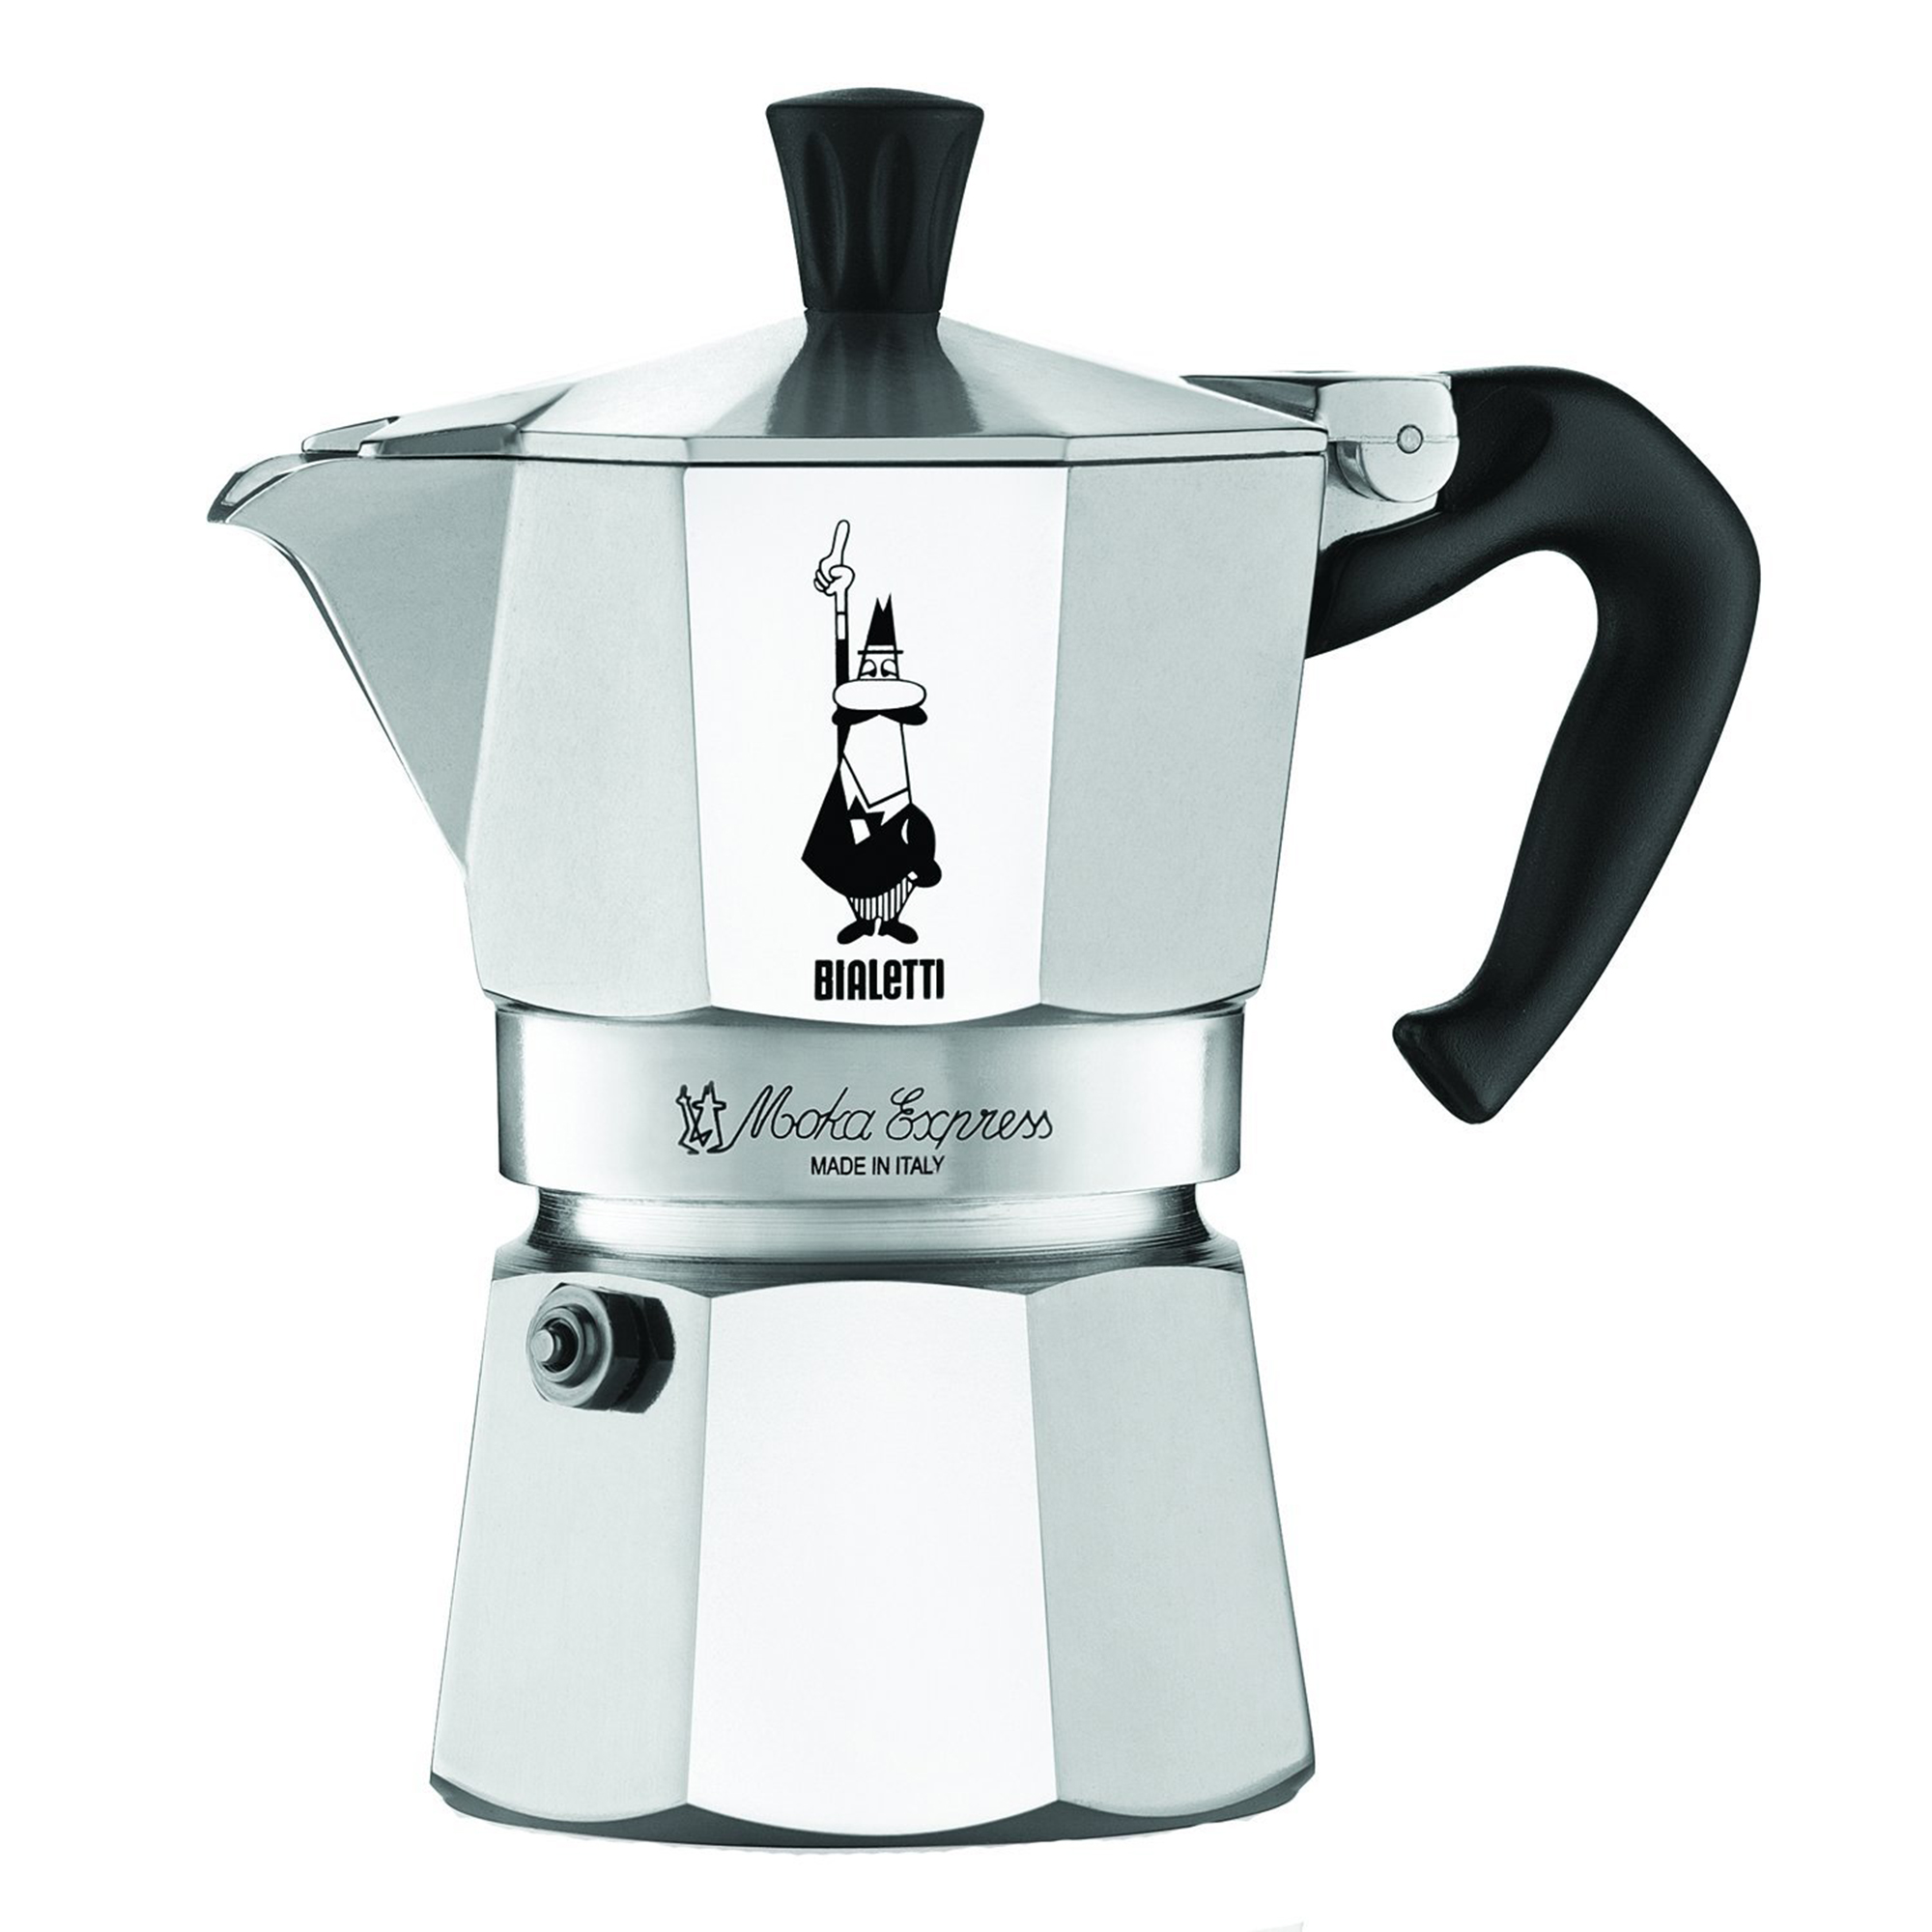 https://www.illy.com/on/demandware.static/-/Sites-masterCatalog_illycaffe/default/dw0f629213/products/Coffee-Machines/Moka-pots/US206799_coffee-machines_moka-pot_bialetti-express-3-cup_illy-shop/US206799_coffee-machines_moka-pot_bialetti-express-3-cup_illy-shop_2000x2000.jpg